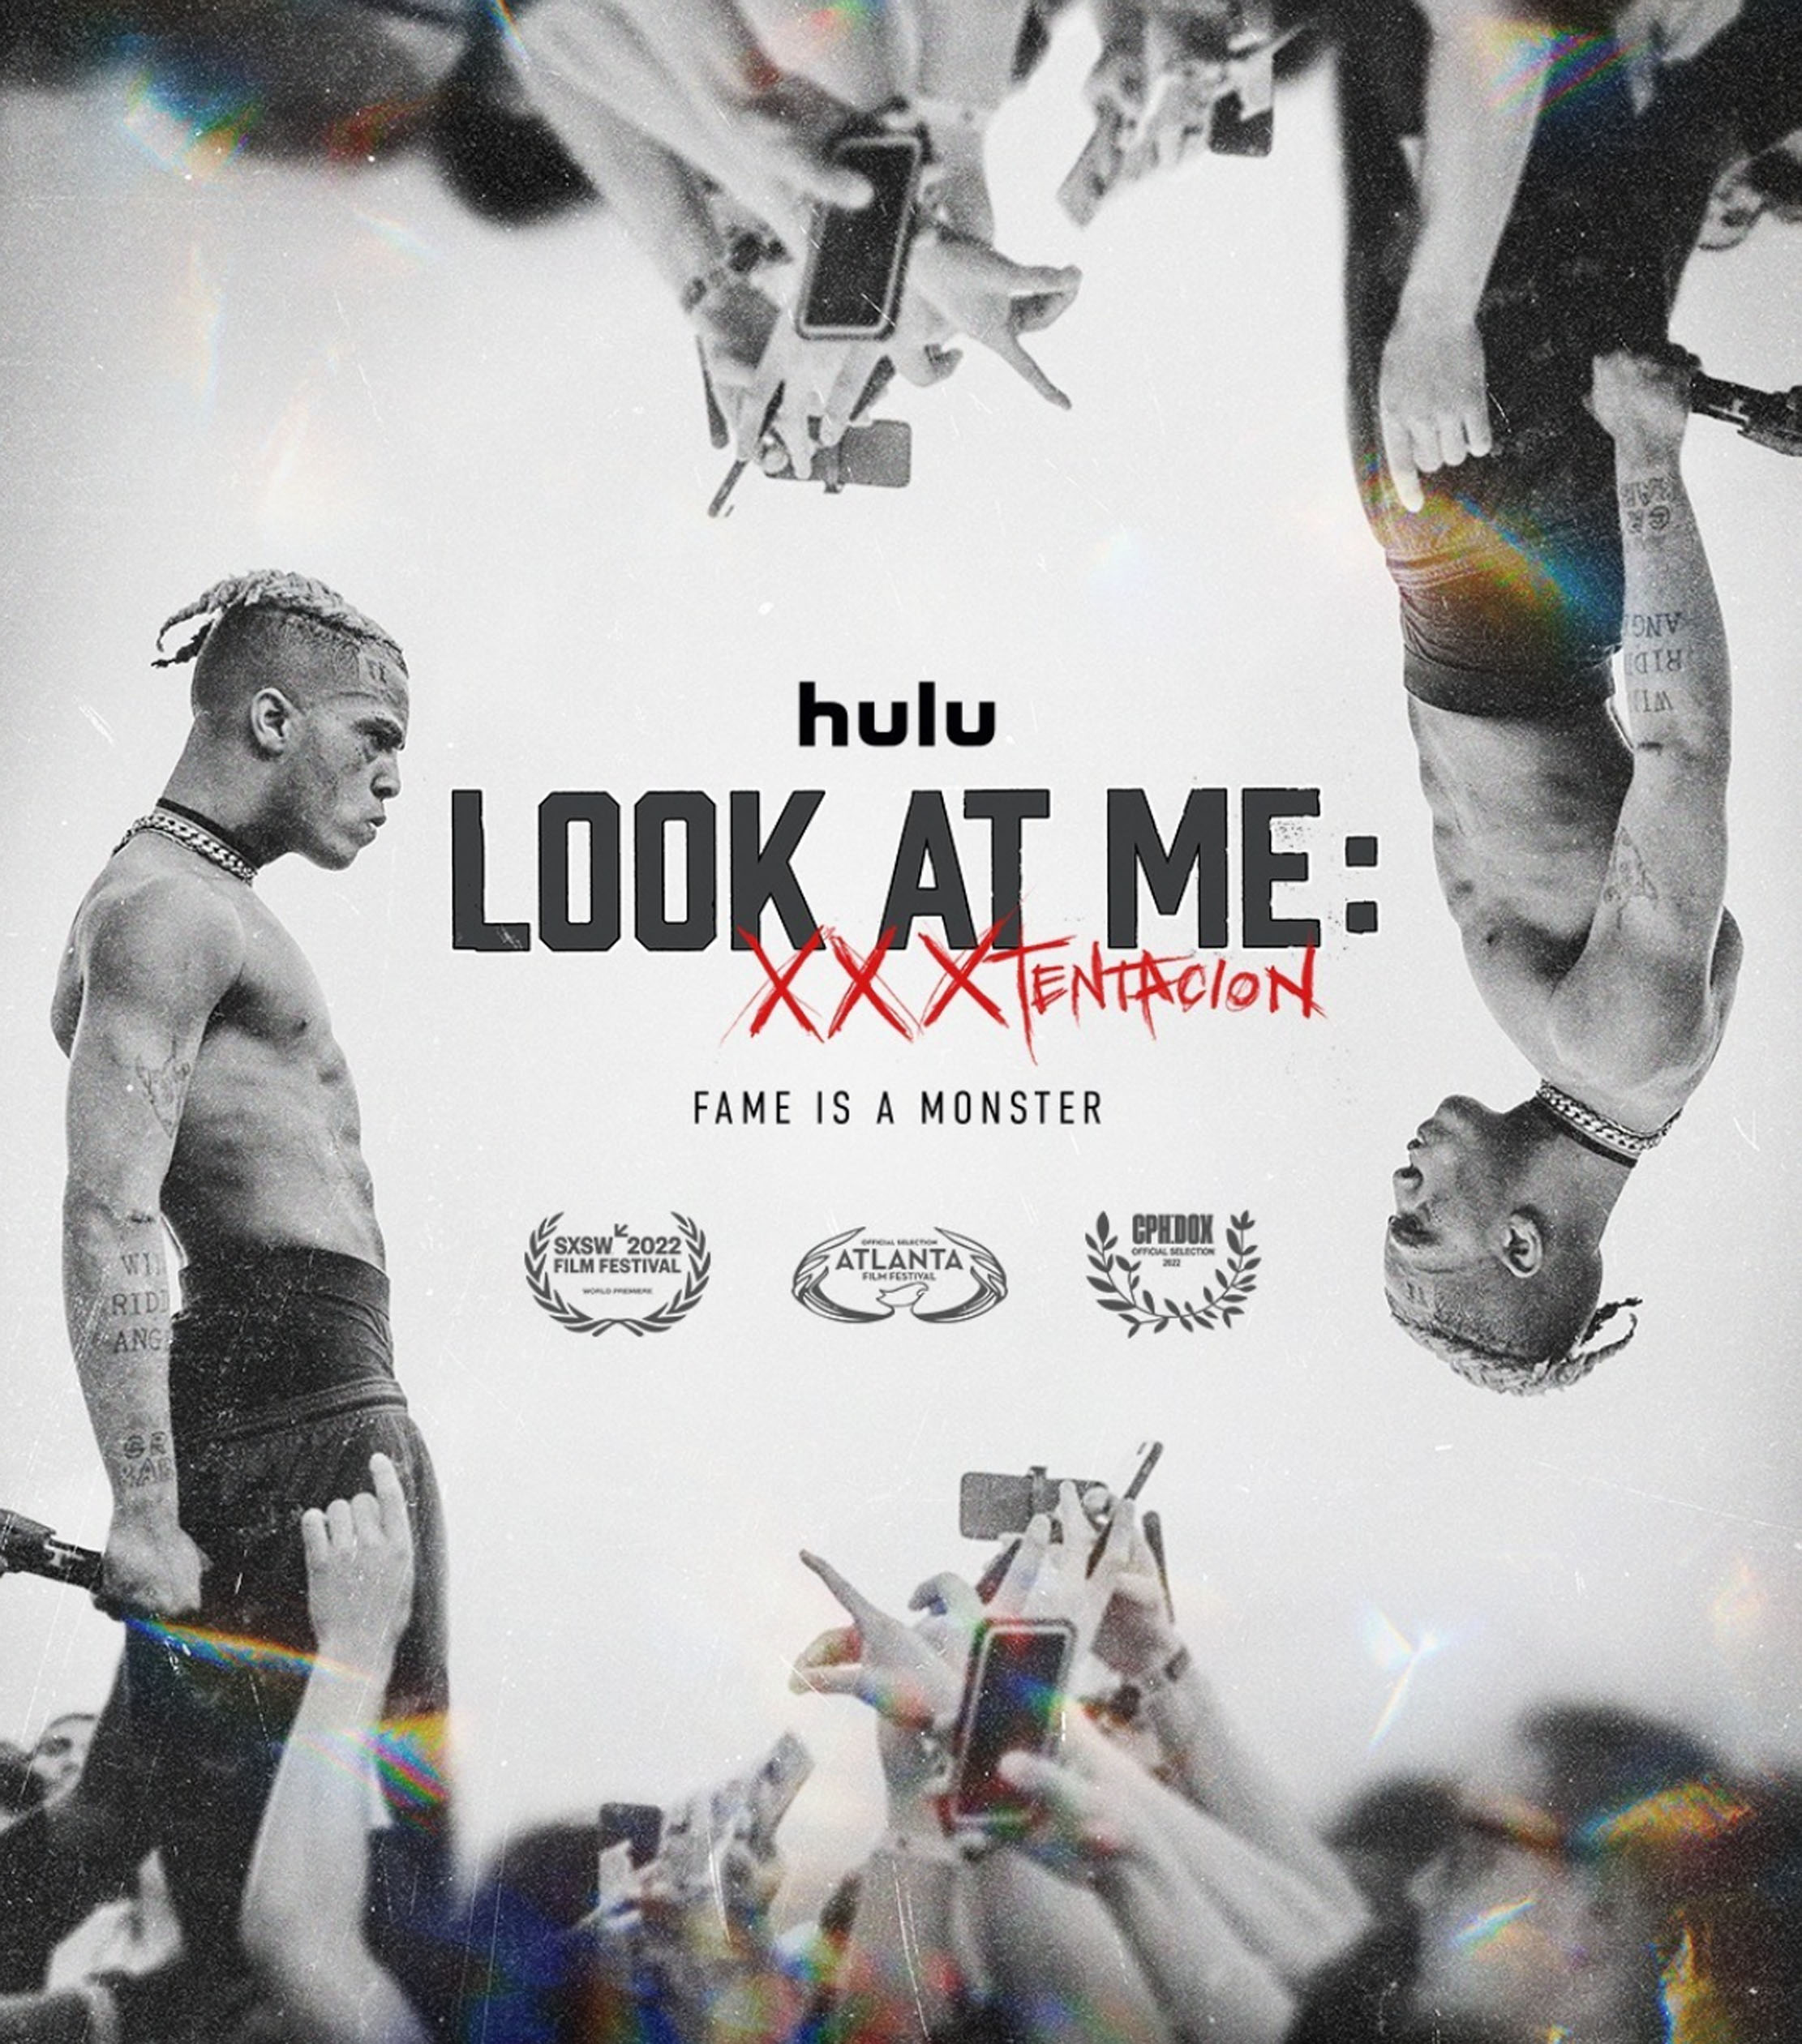 xxxtentacion look at me hulu documentary fame is a monster disney plus